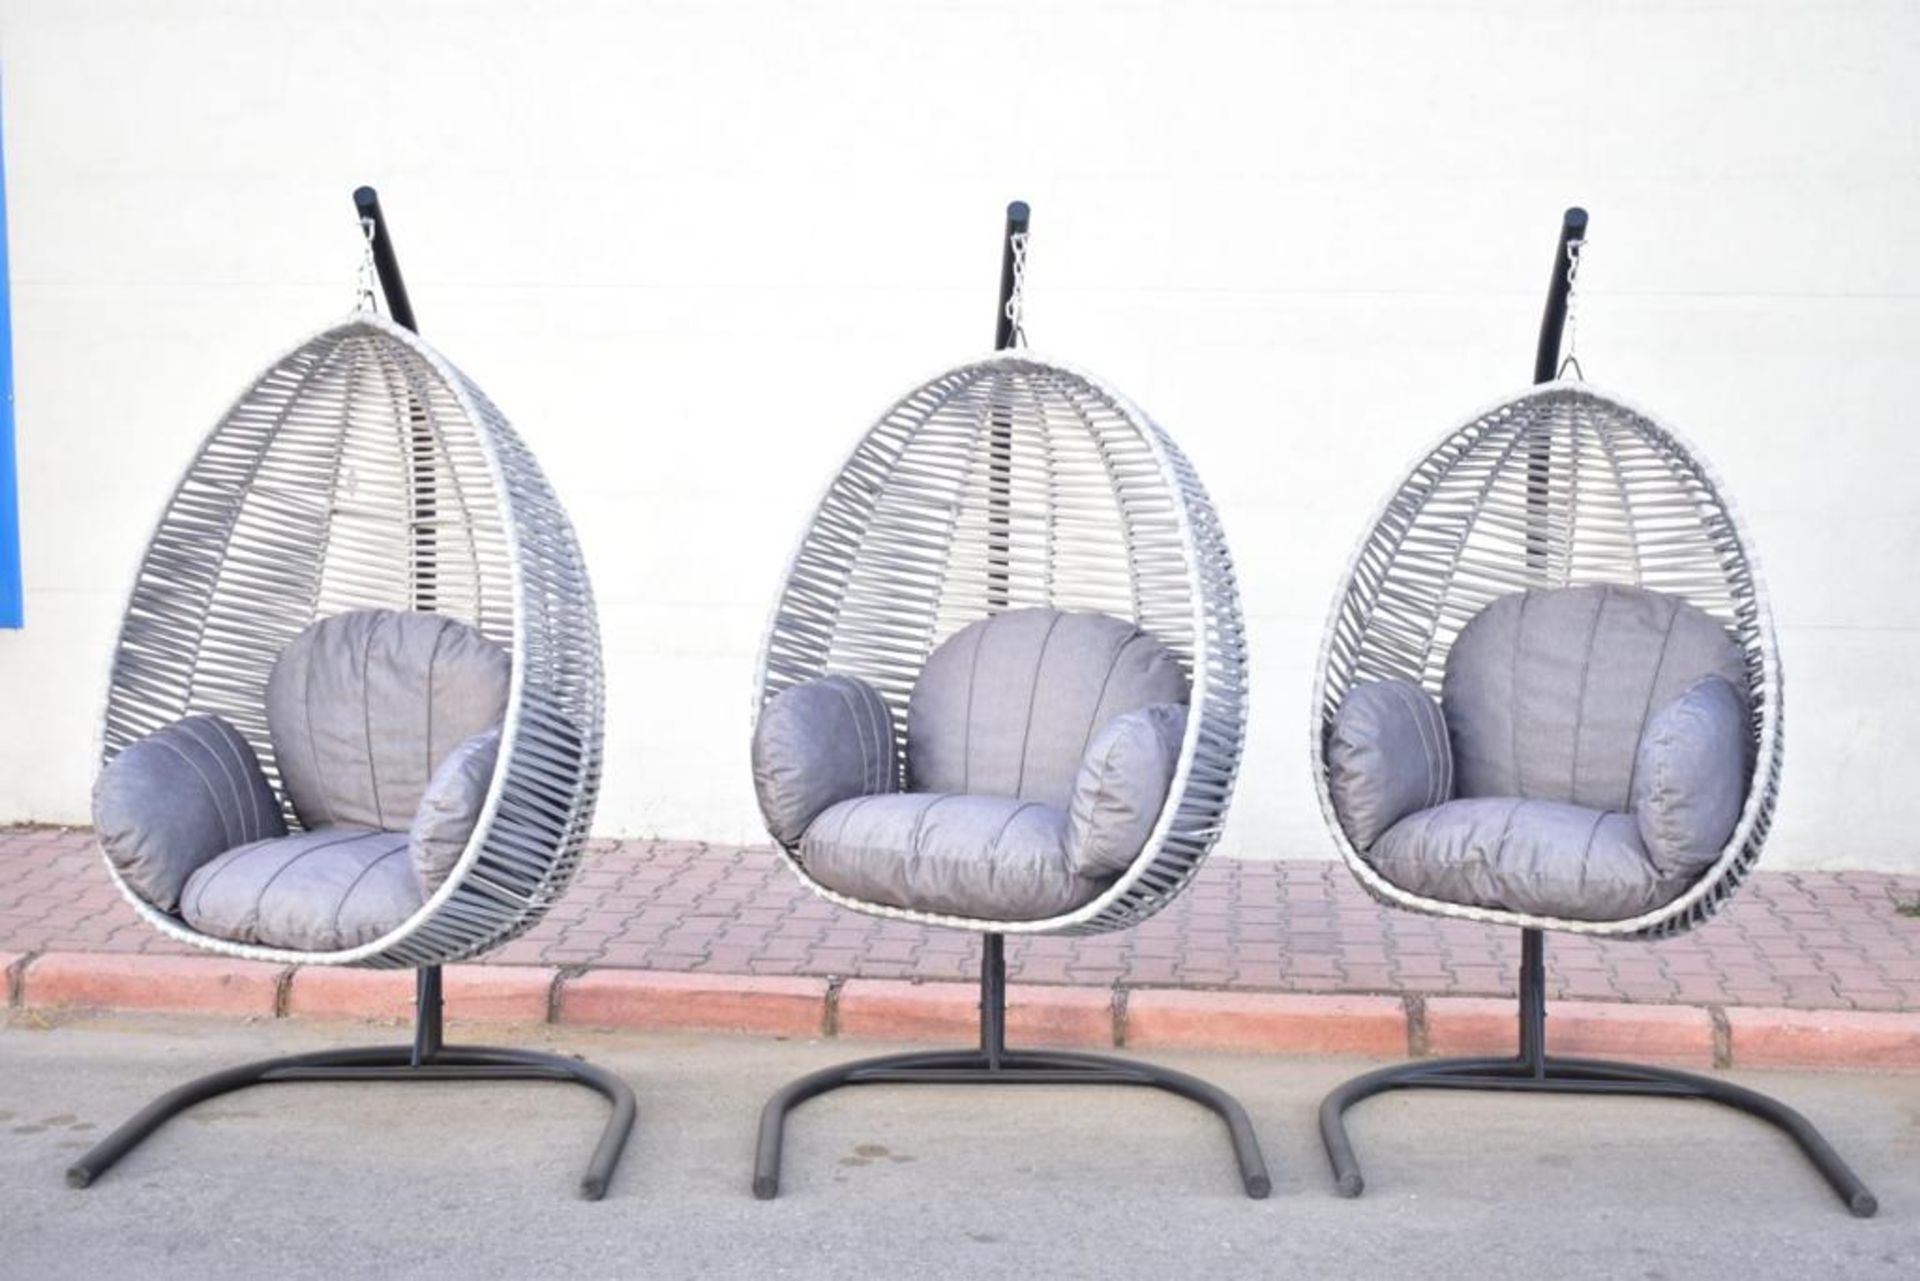 RRP £399 - NEW LUXURY INDOOR/OUTDOOR GREY HANGING EGG CHAIR - CAN BE DELIVERED ON A PALLET -